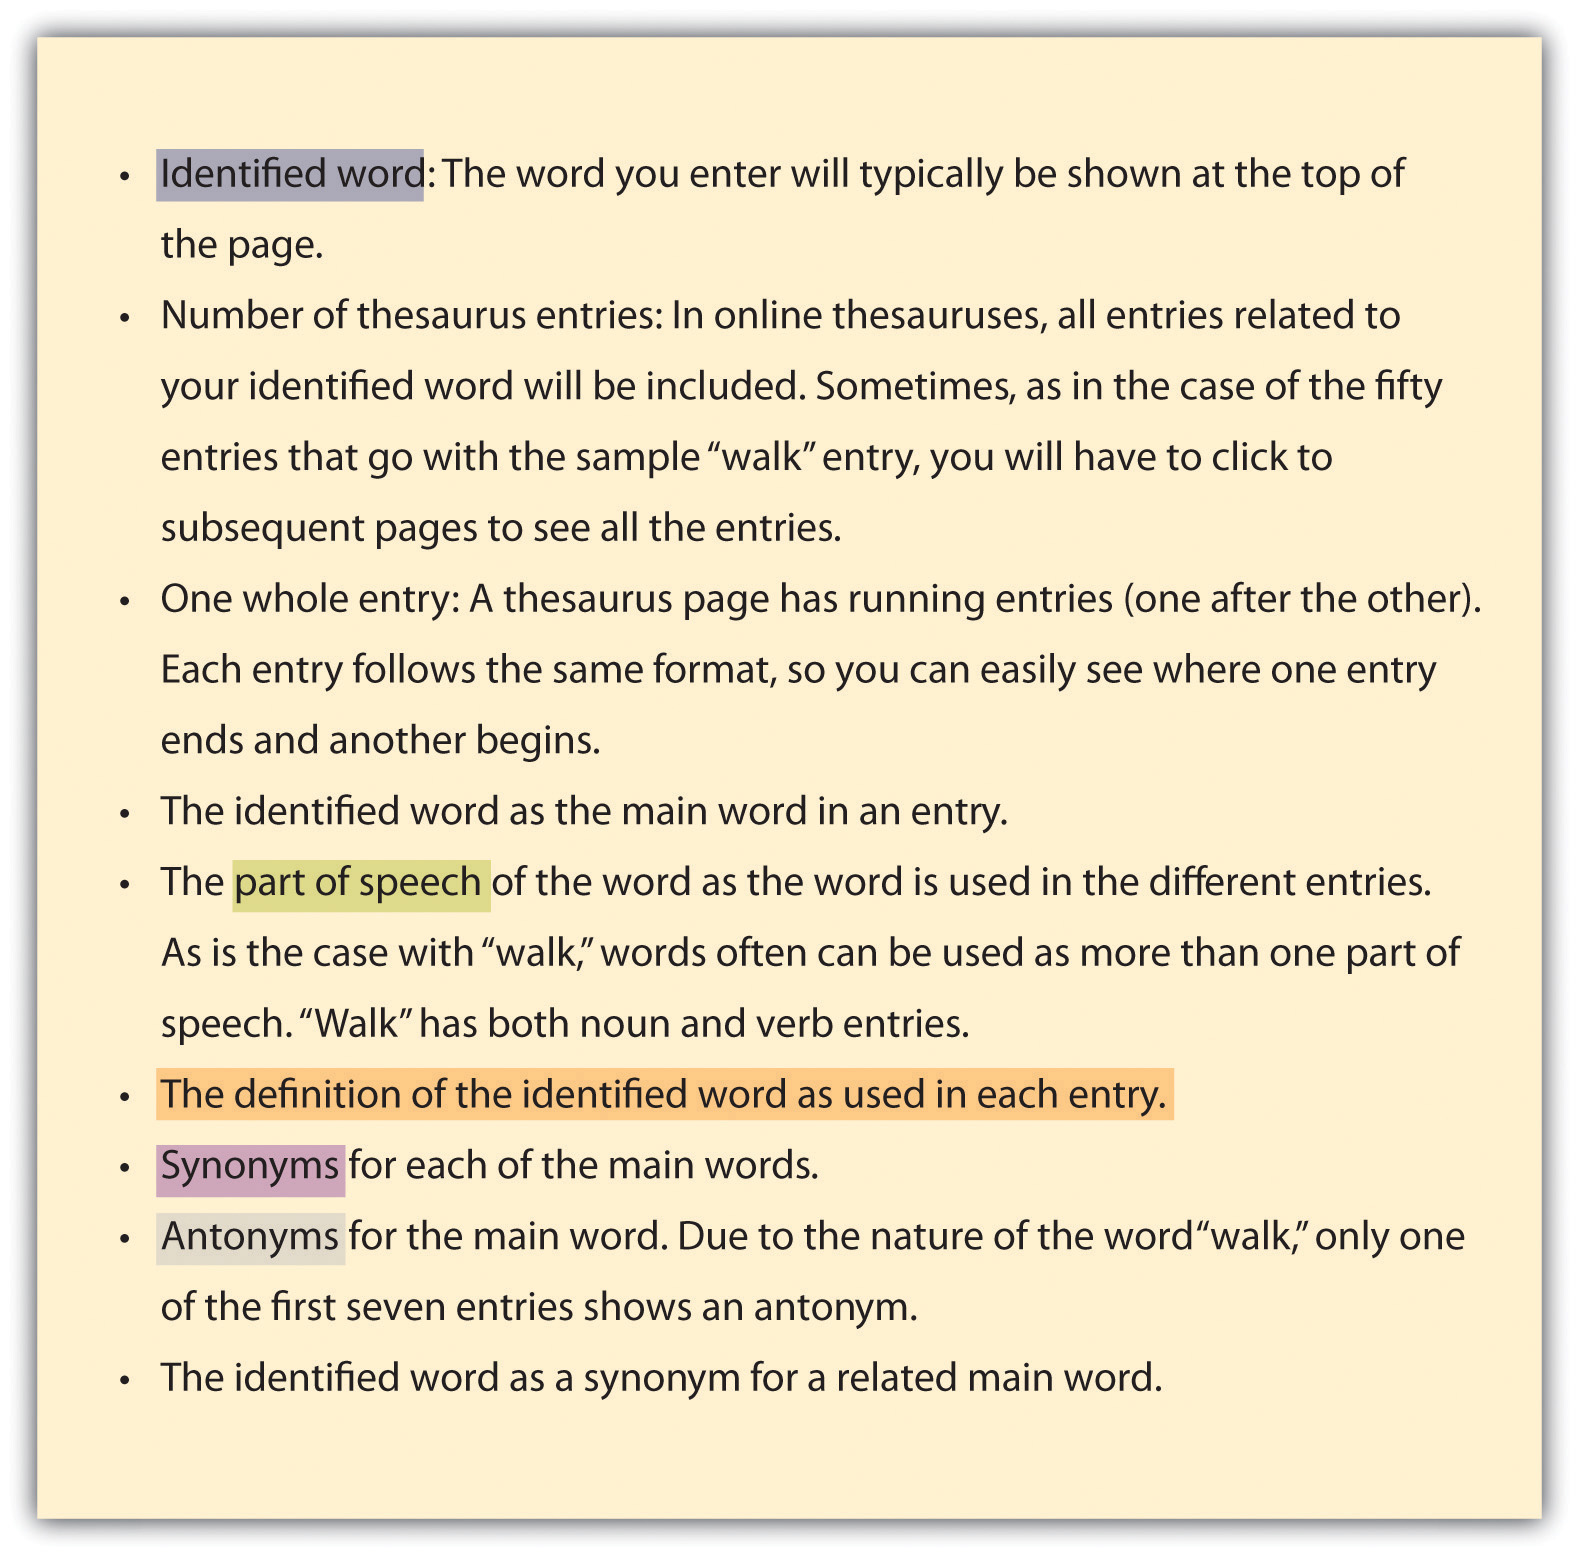 using-the-dictionary-and-thesaurus-effectively